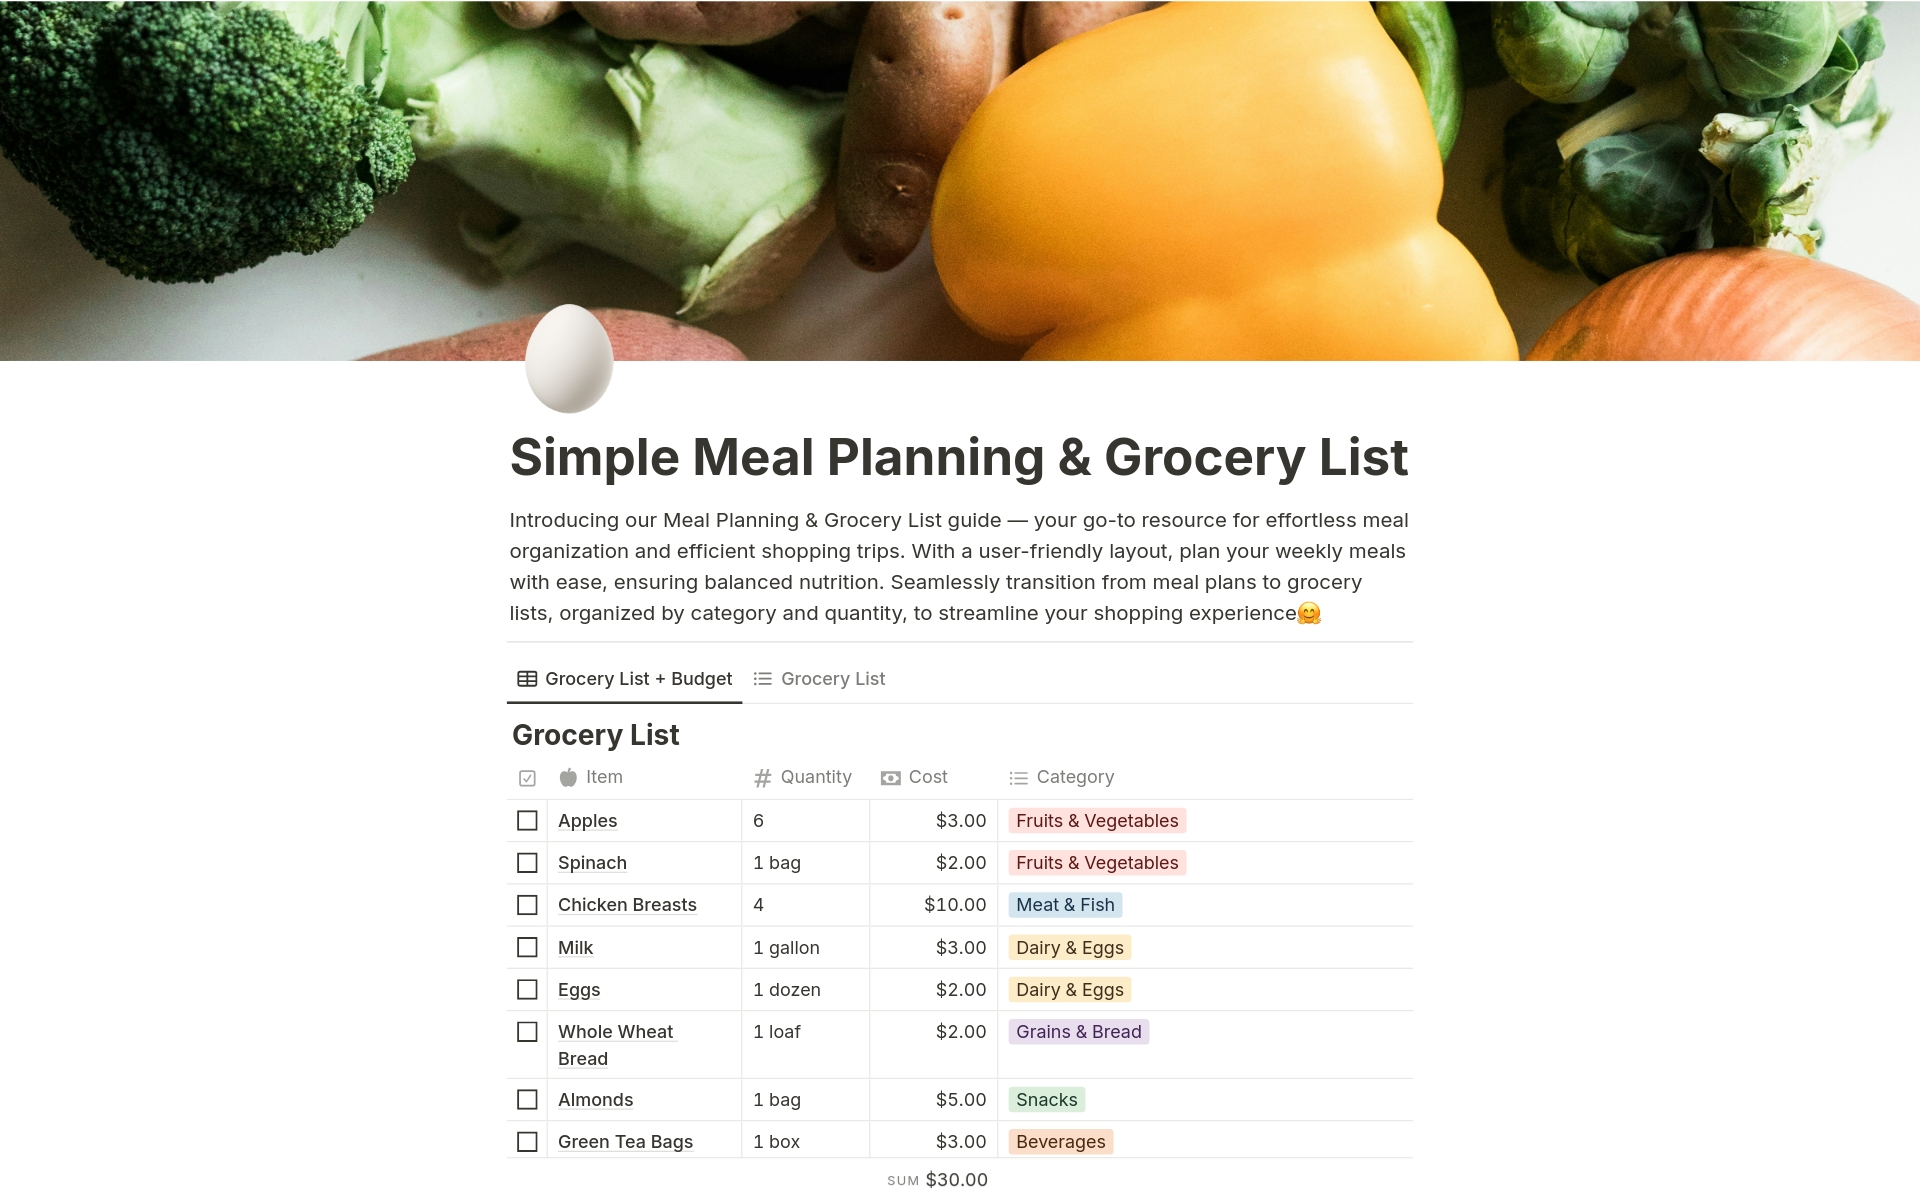 This meal planner and grocery list is a convenient tool that can help users organize their meals for the week ahead. It also complies a grocery list that is organized by category and quantity, to also include the ability to total the cost for efficient, budget-friendly shopping. 